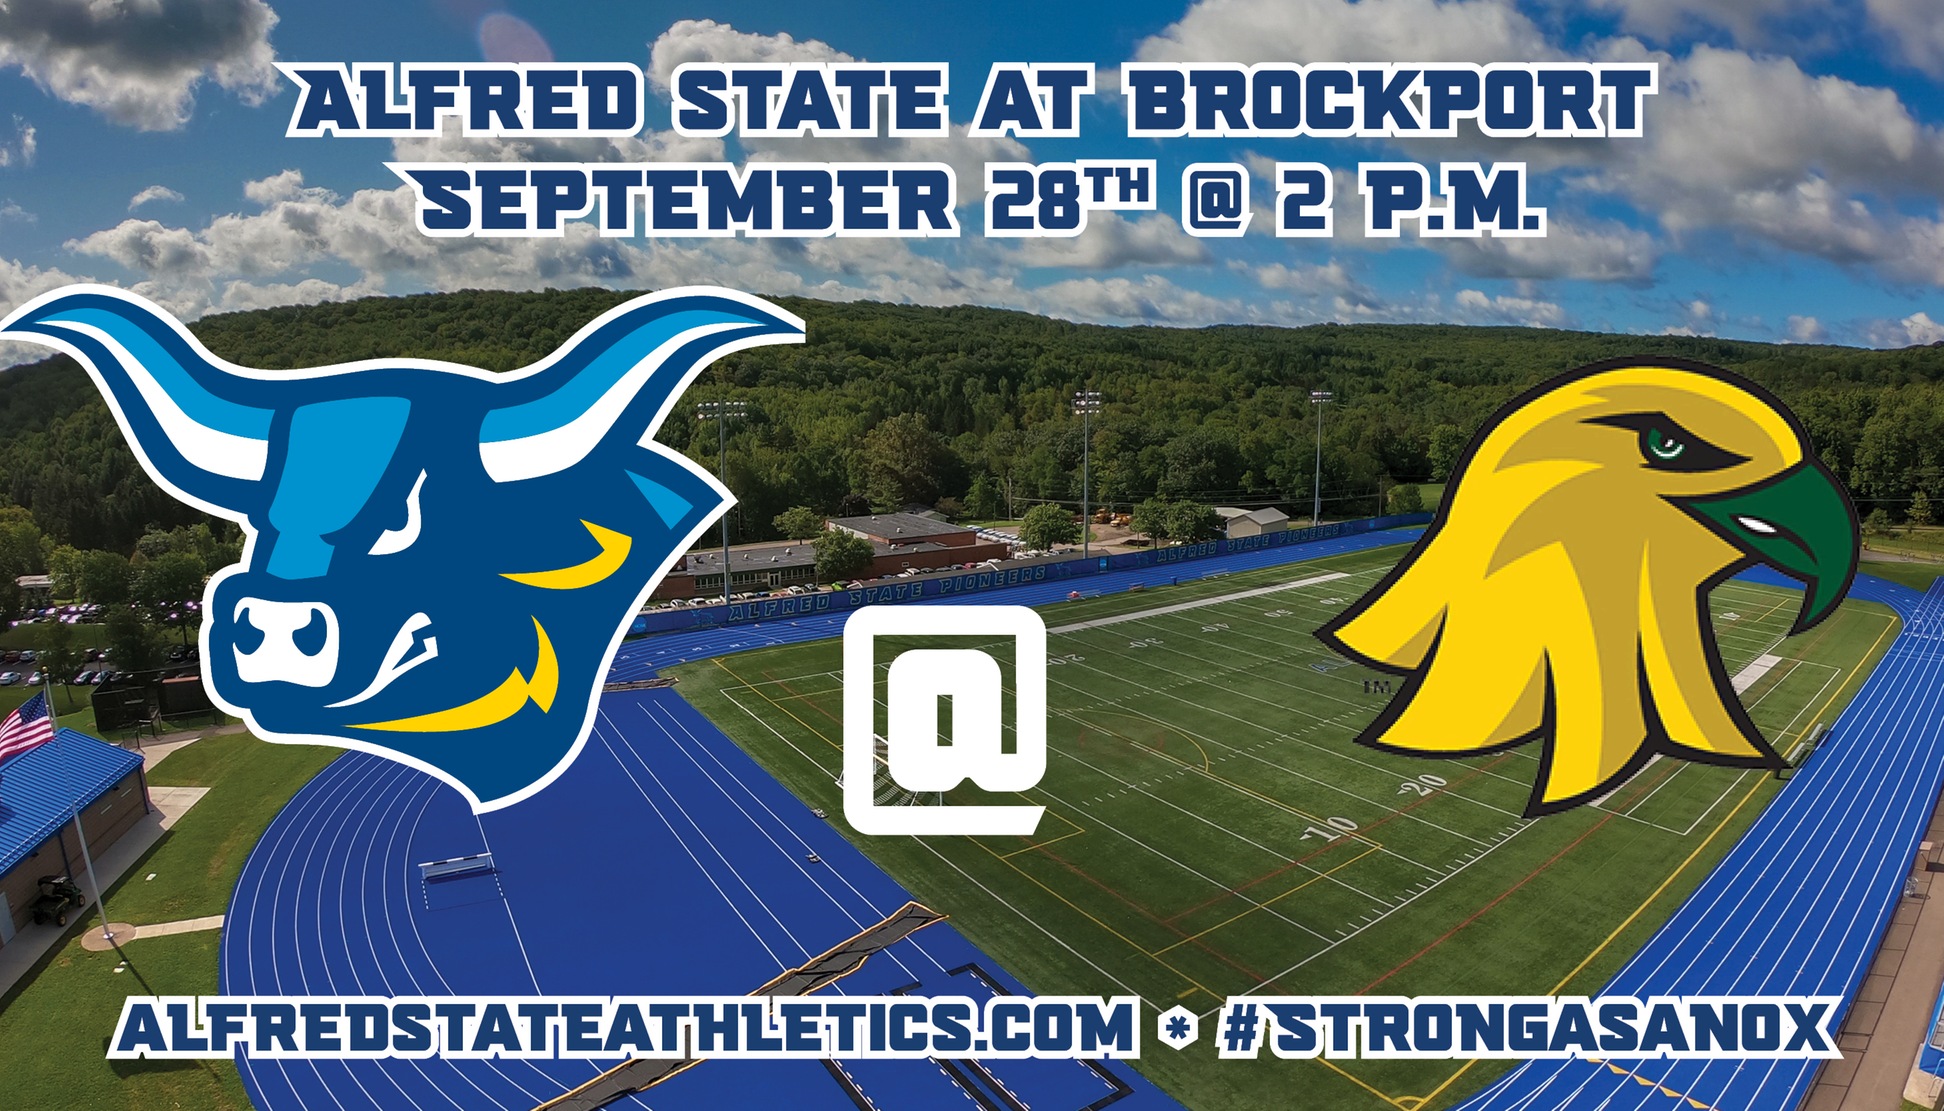 Alfred State travels to Brockport for a 2 p.m. contest vs. the Golden Eagles